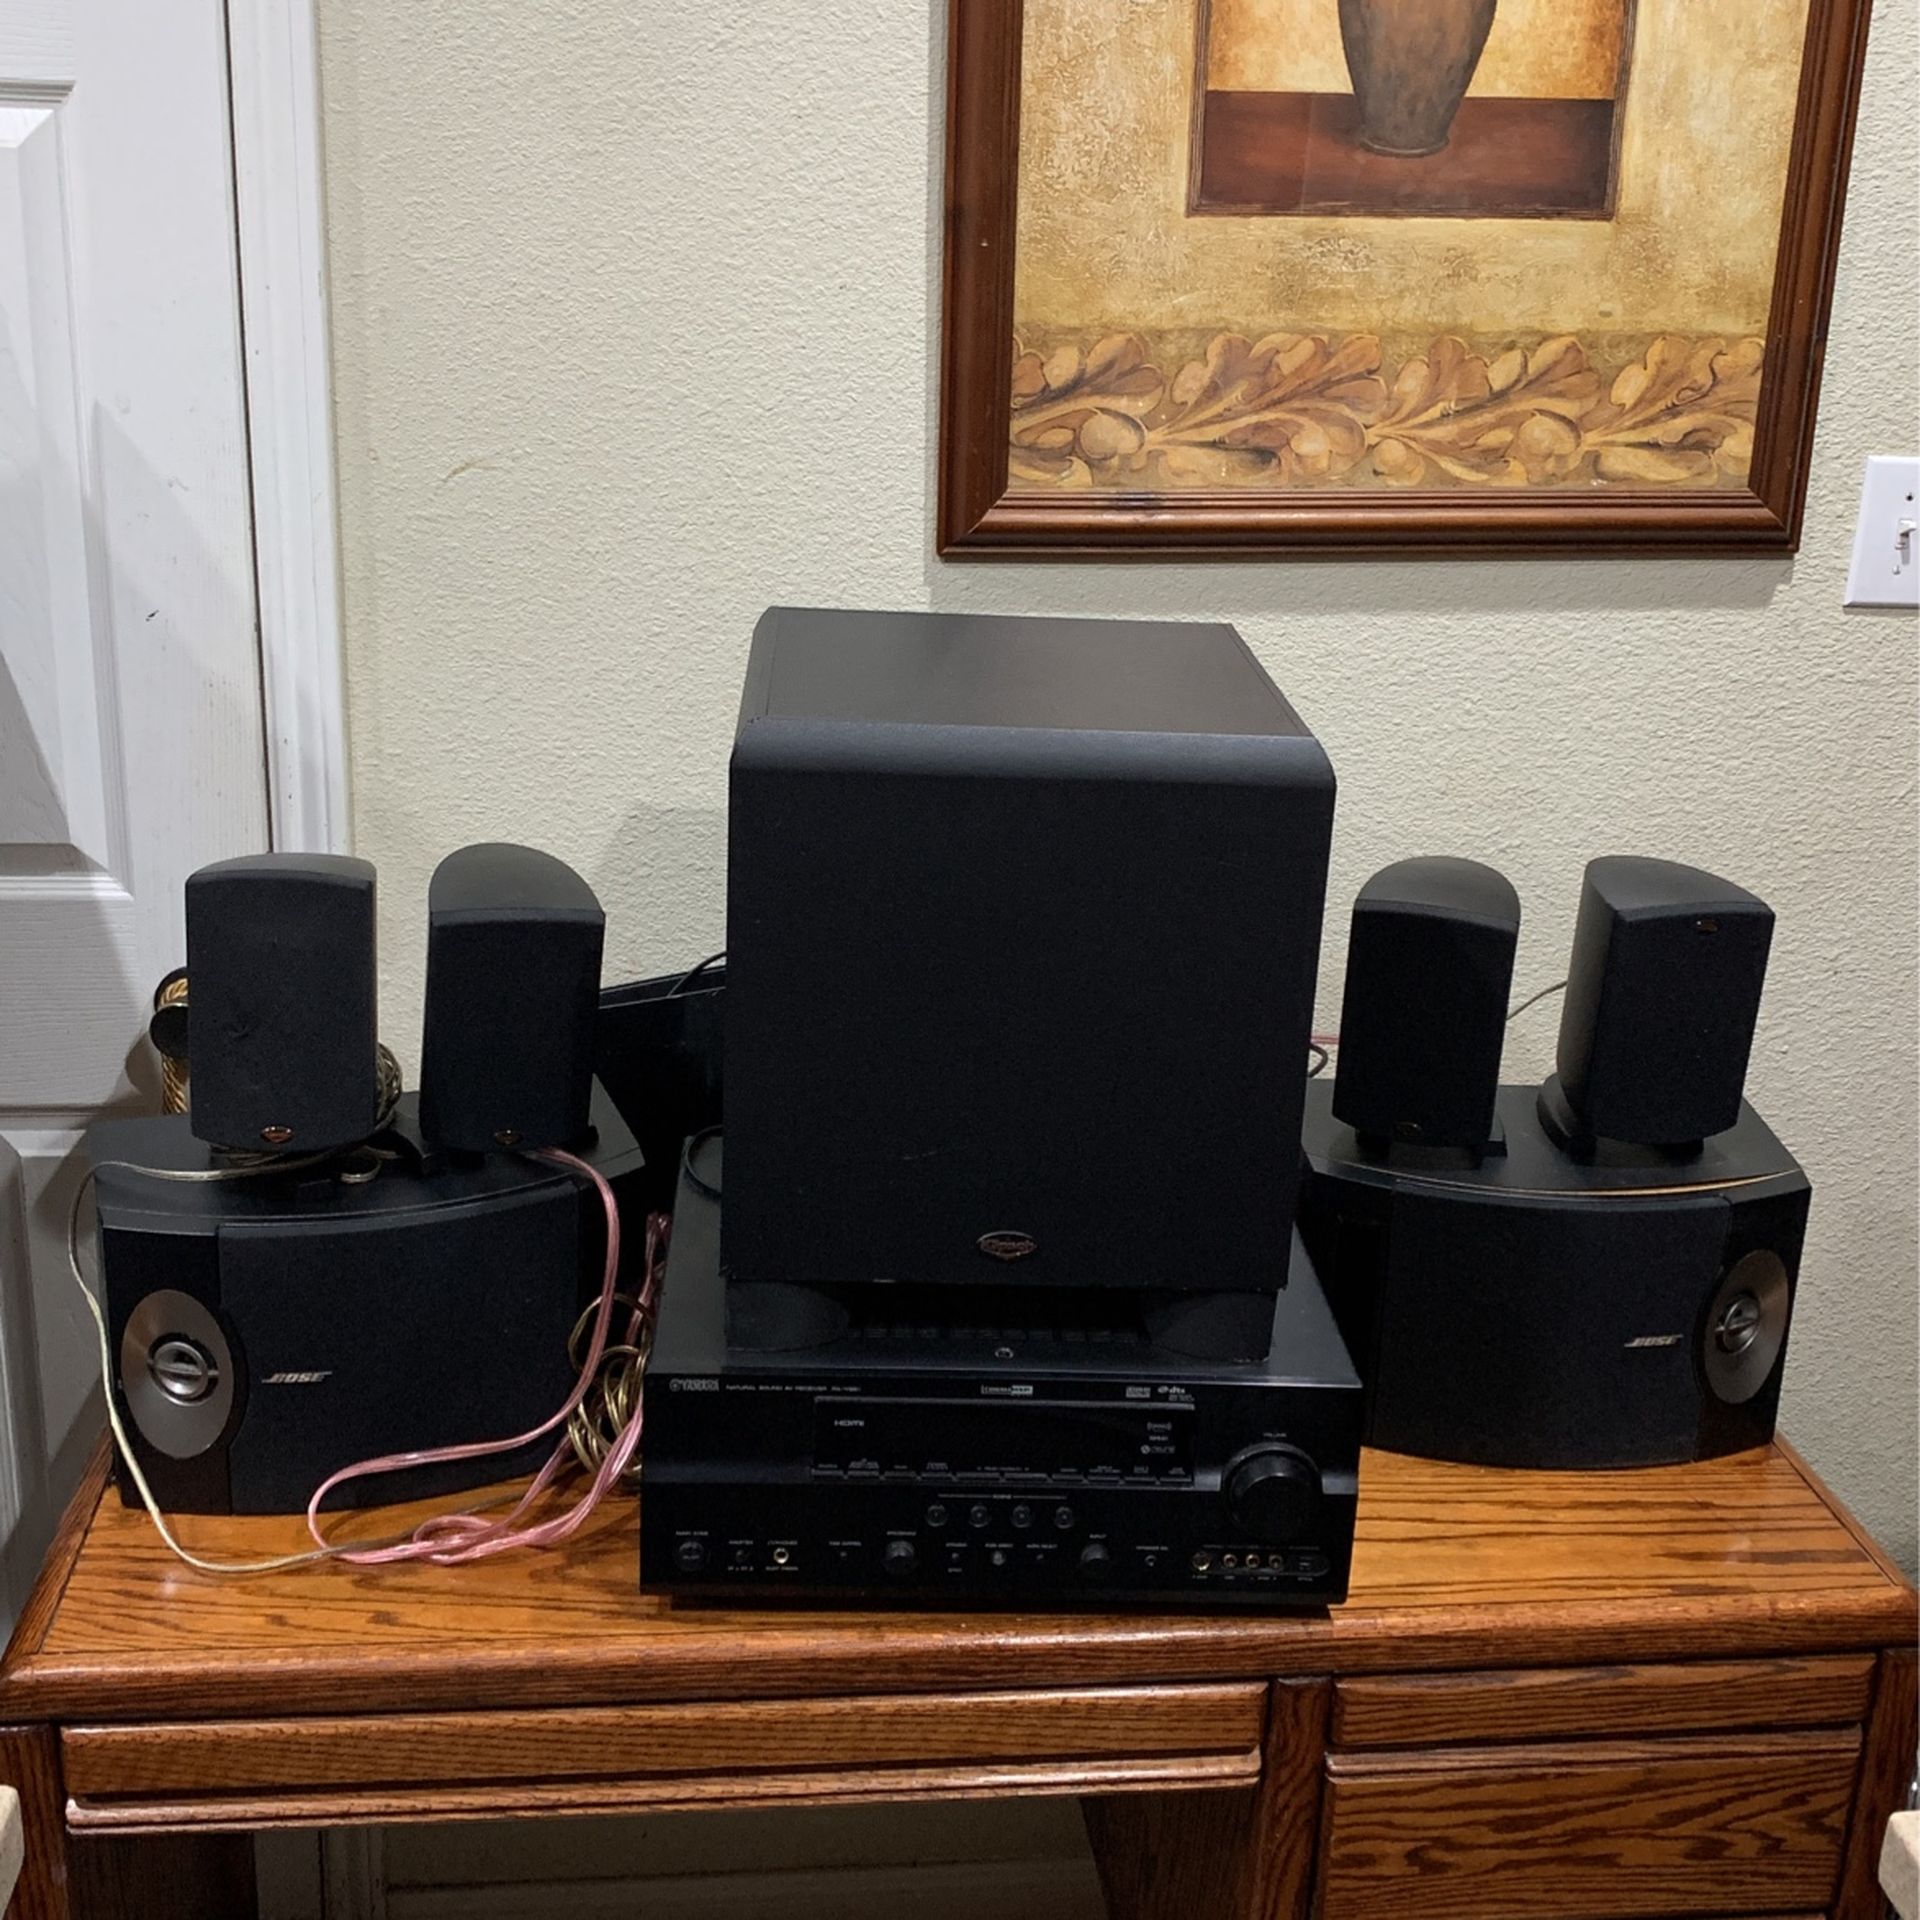 Yamaha Receiver RX-V661 W/2Bose Speakers /Klipsch KSW-10 Subwoofer & Klipsch Quintet 2 Black Speakers (all Ready Wired Ready To Turn On)